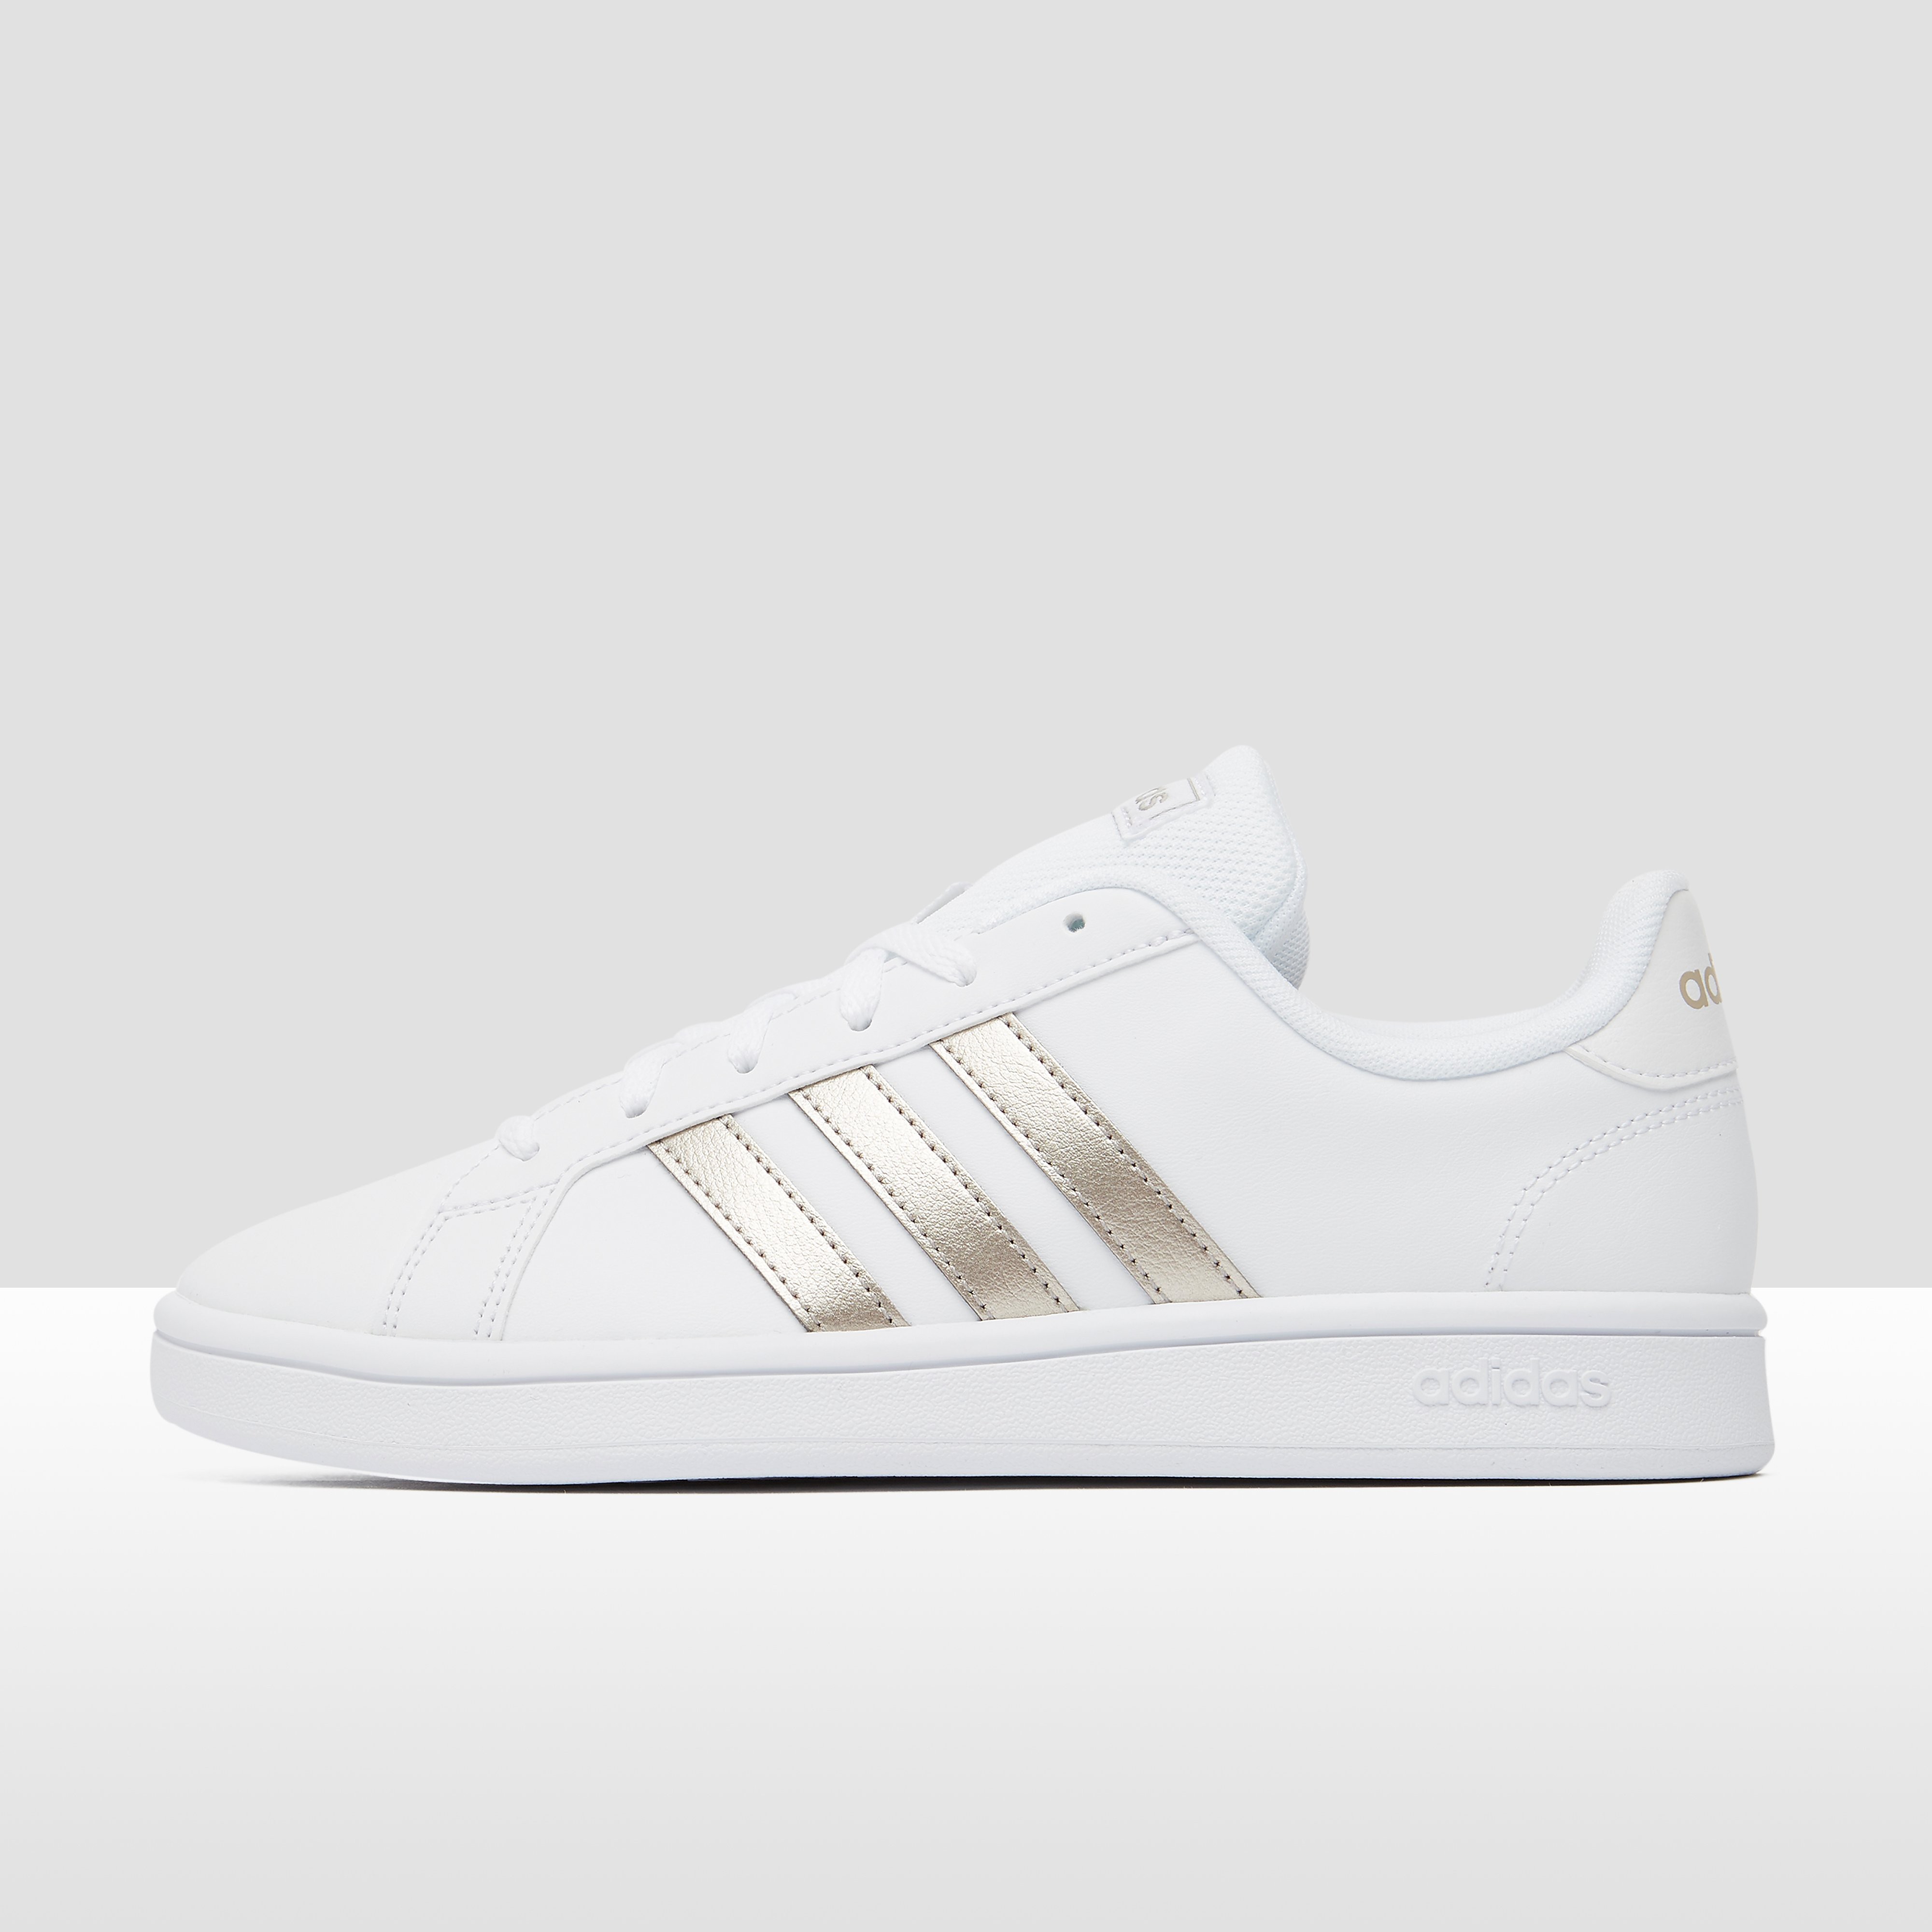 adidas Grand court base sneakers wit/goud dames Dames